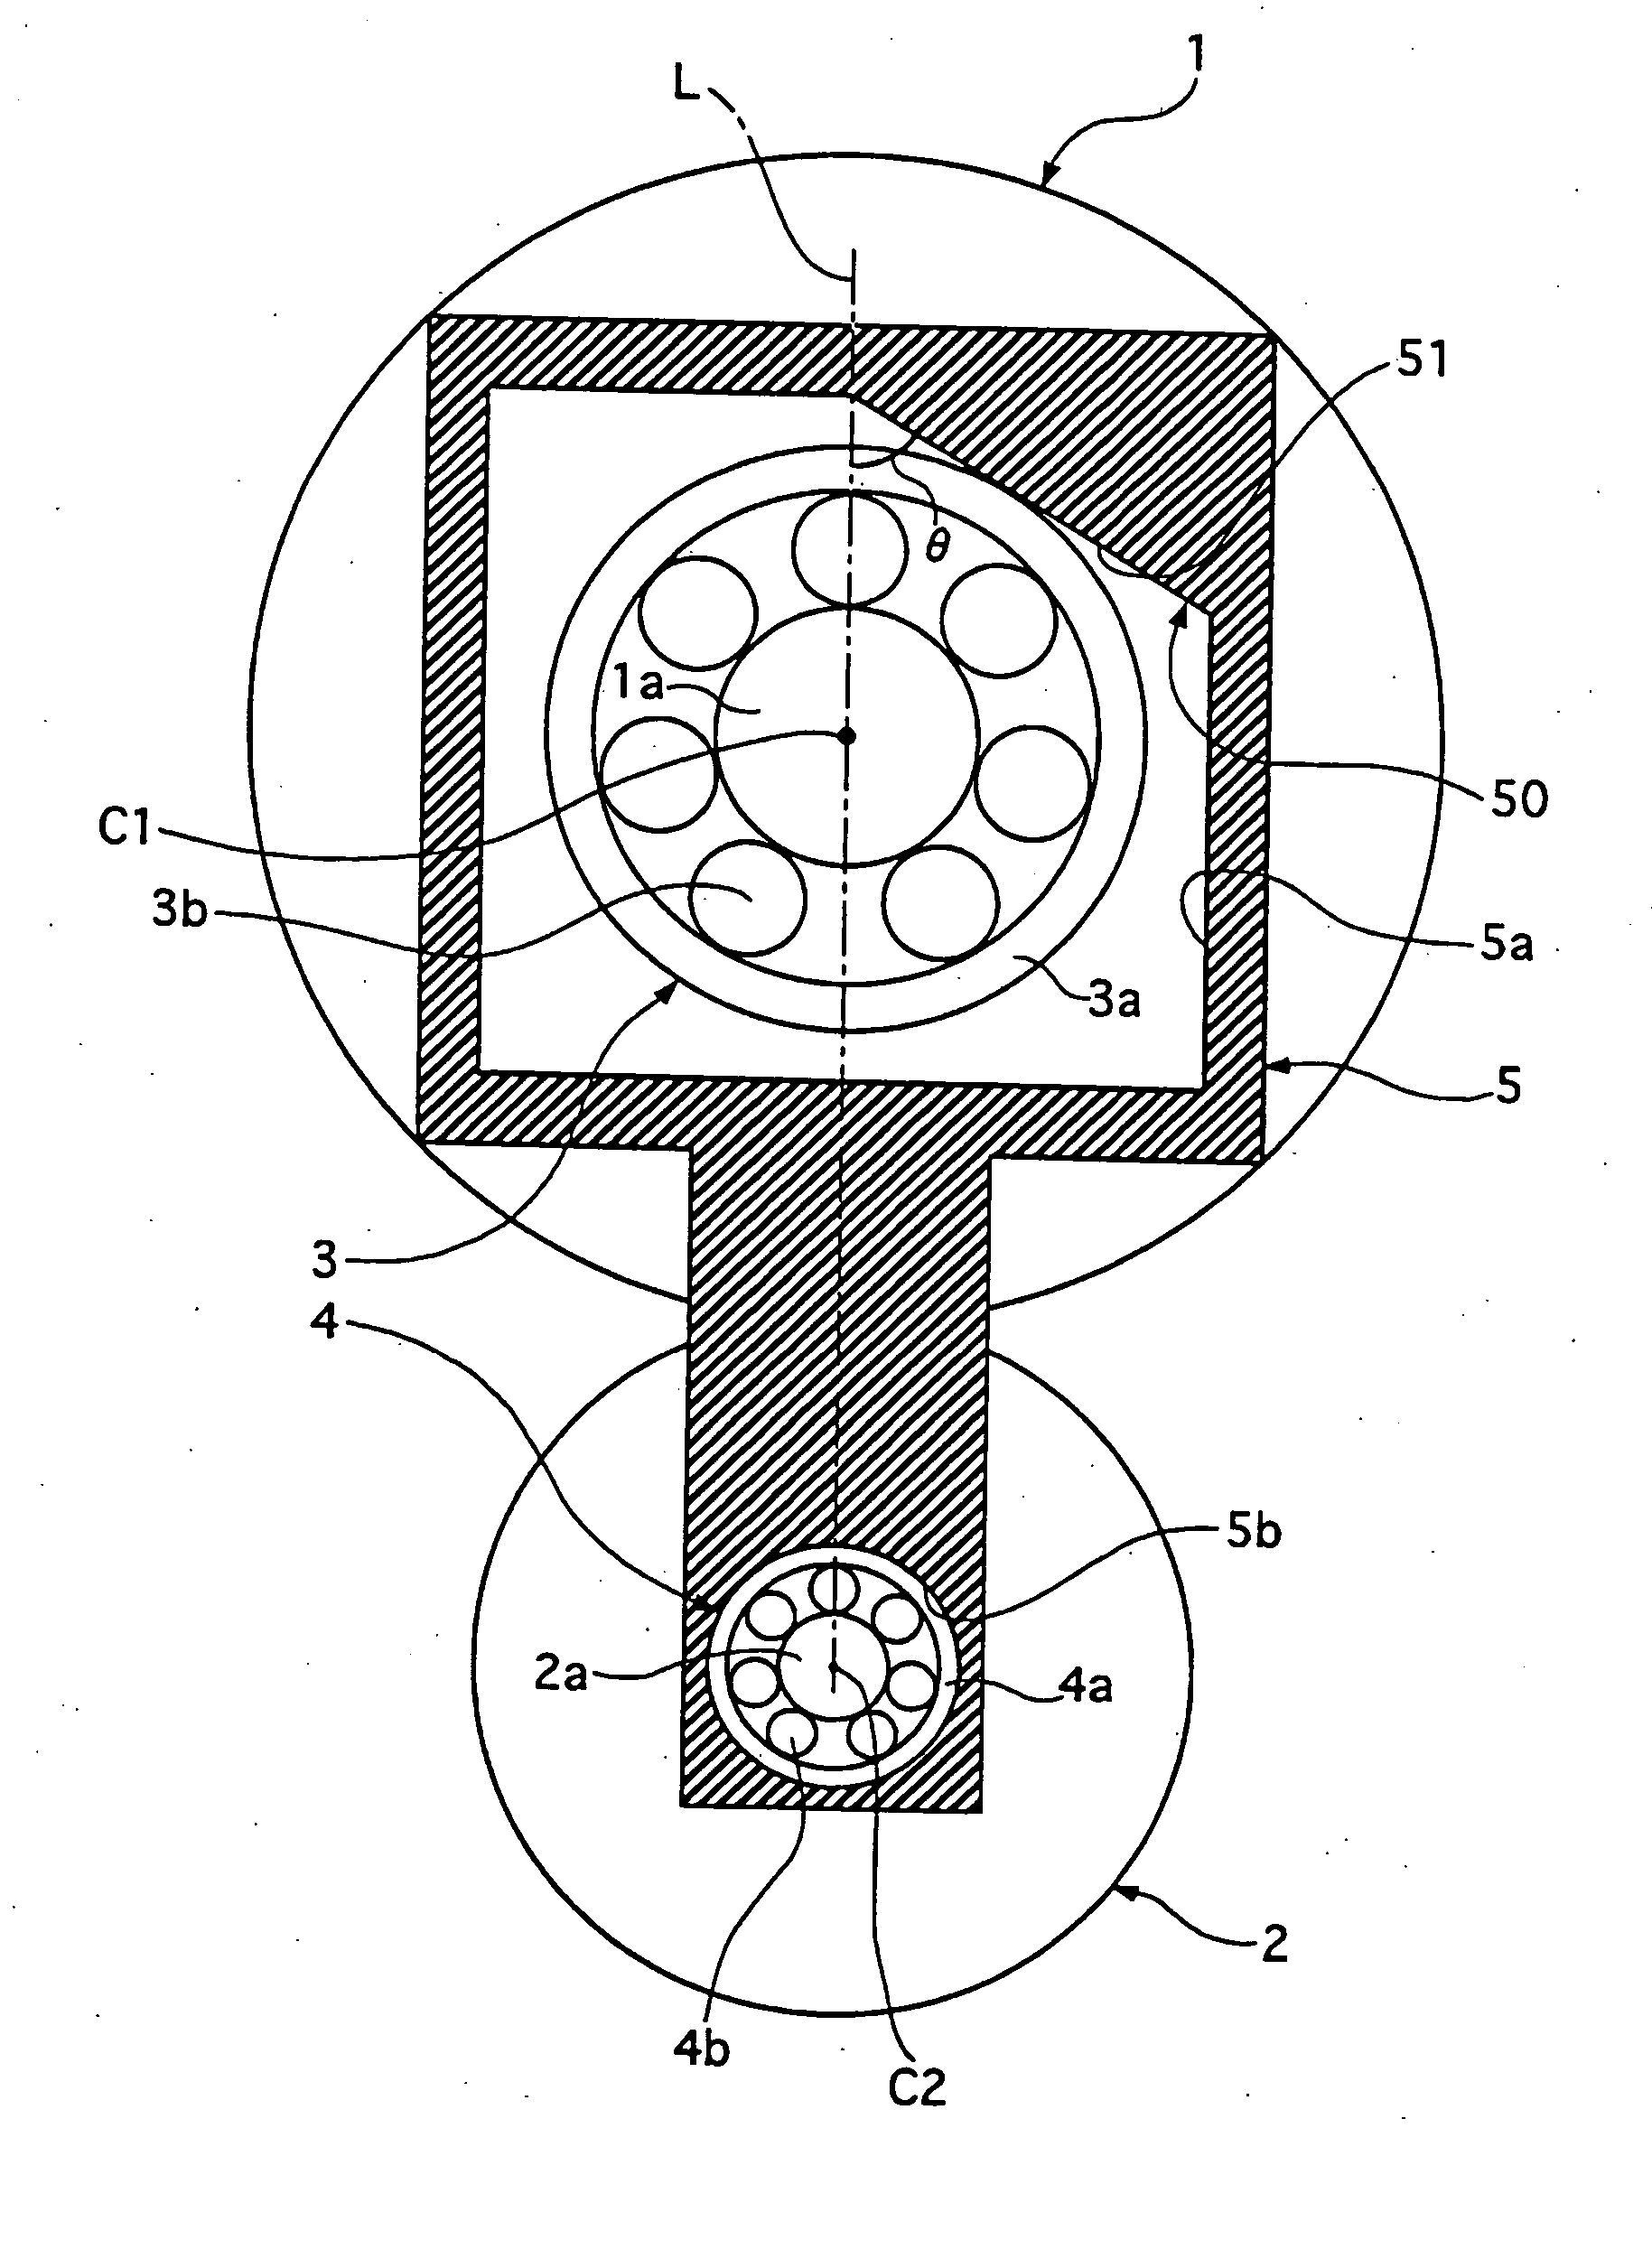 Friction drive device